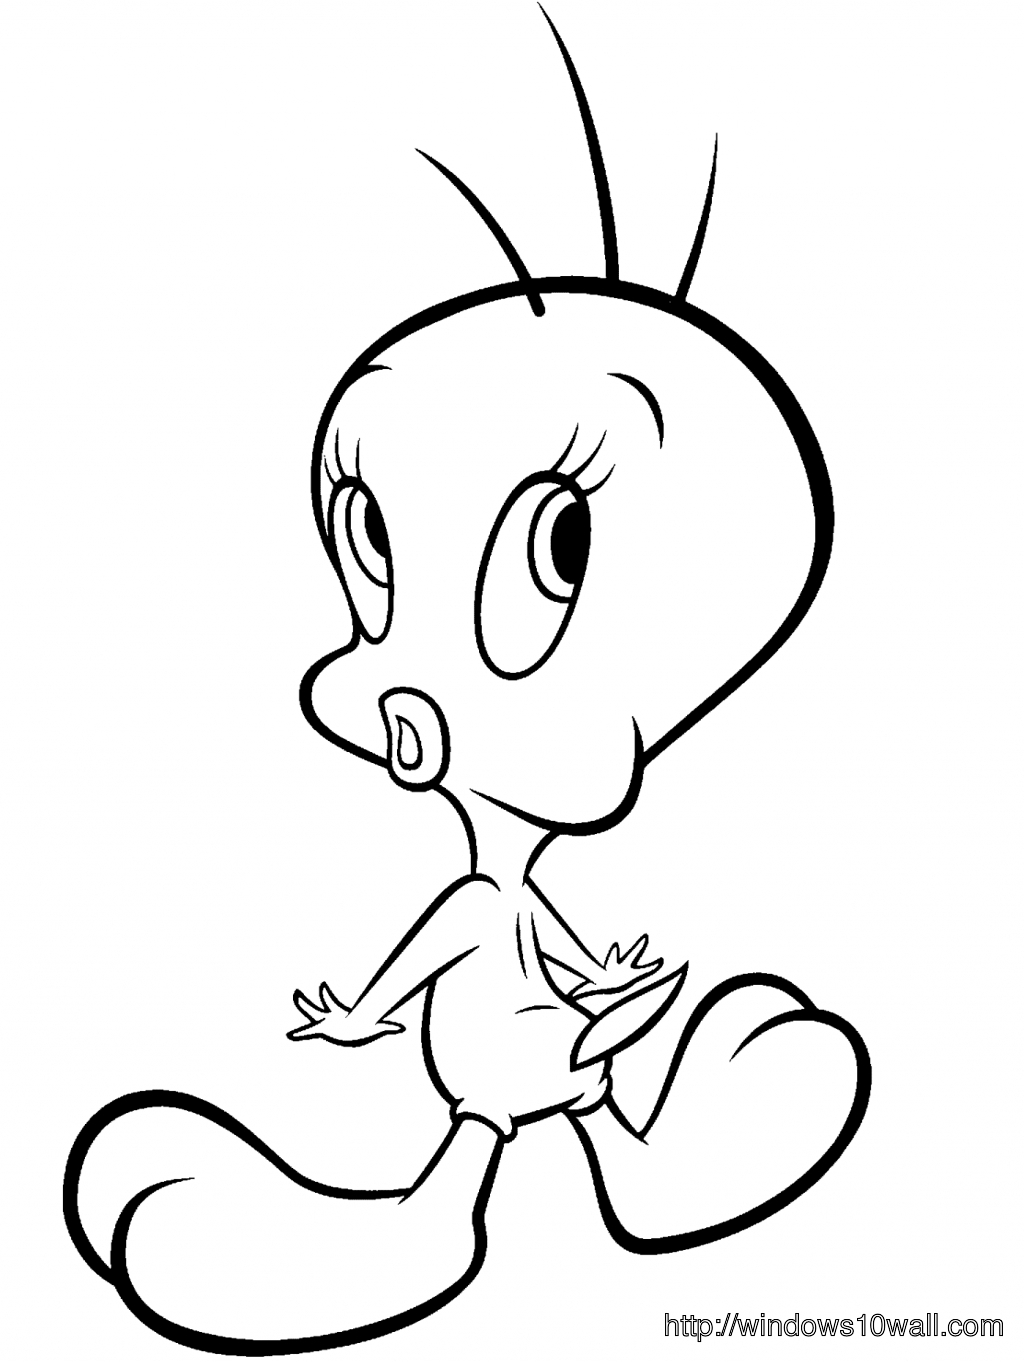 Tweety Coloring Page for Kids Wallpaper